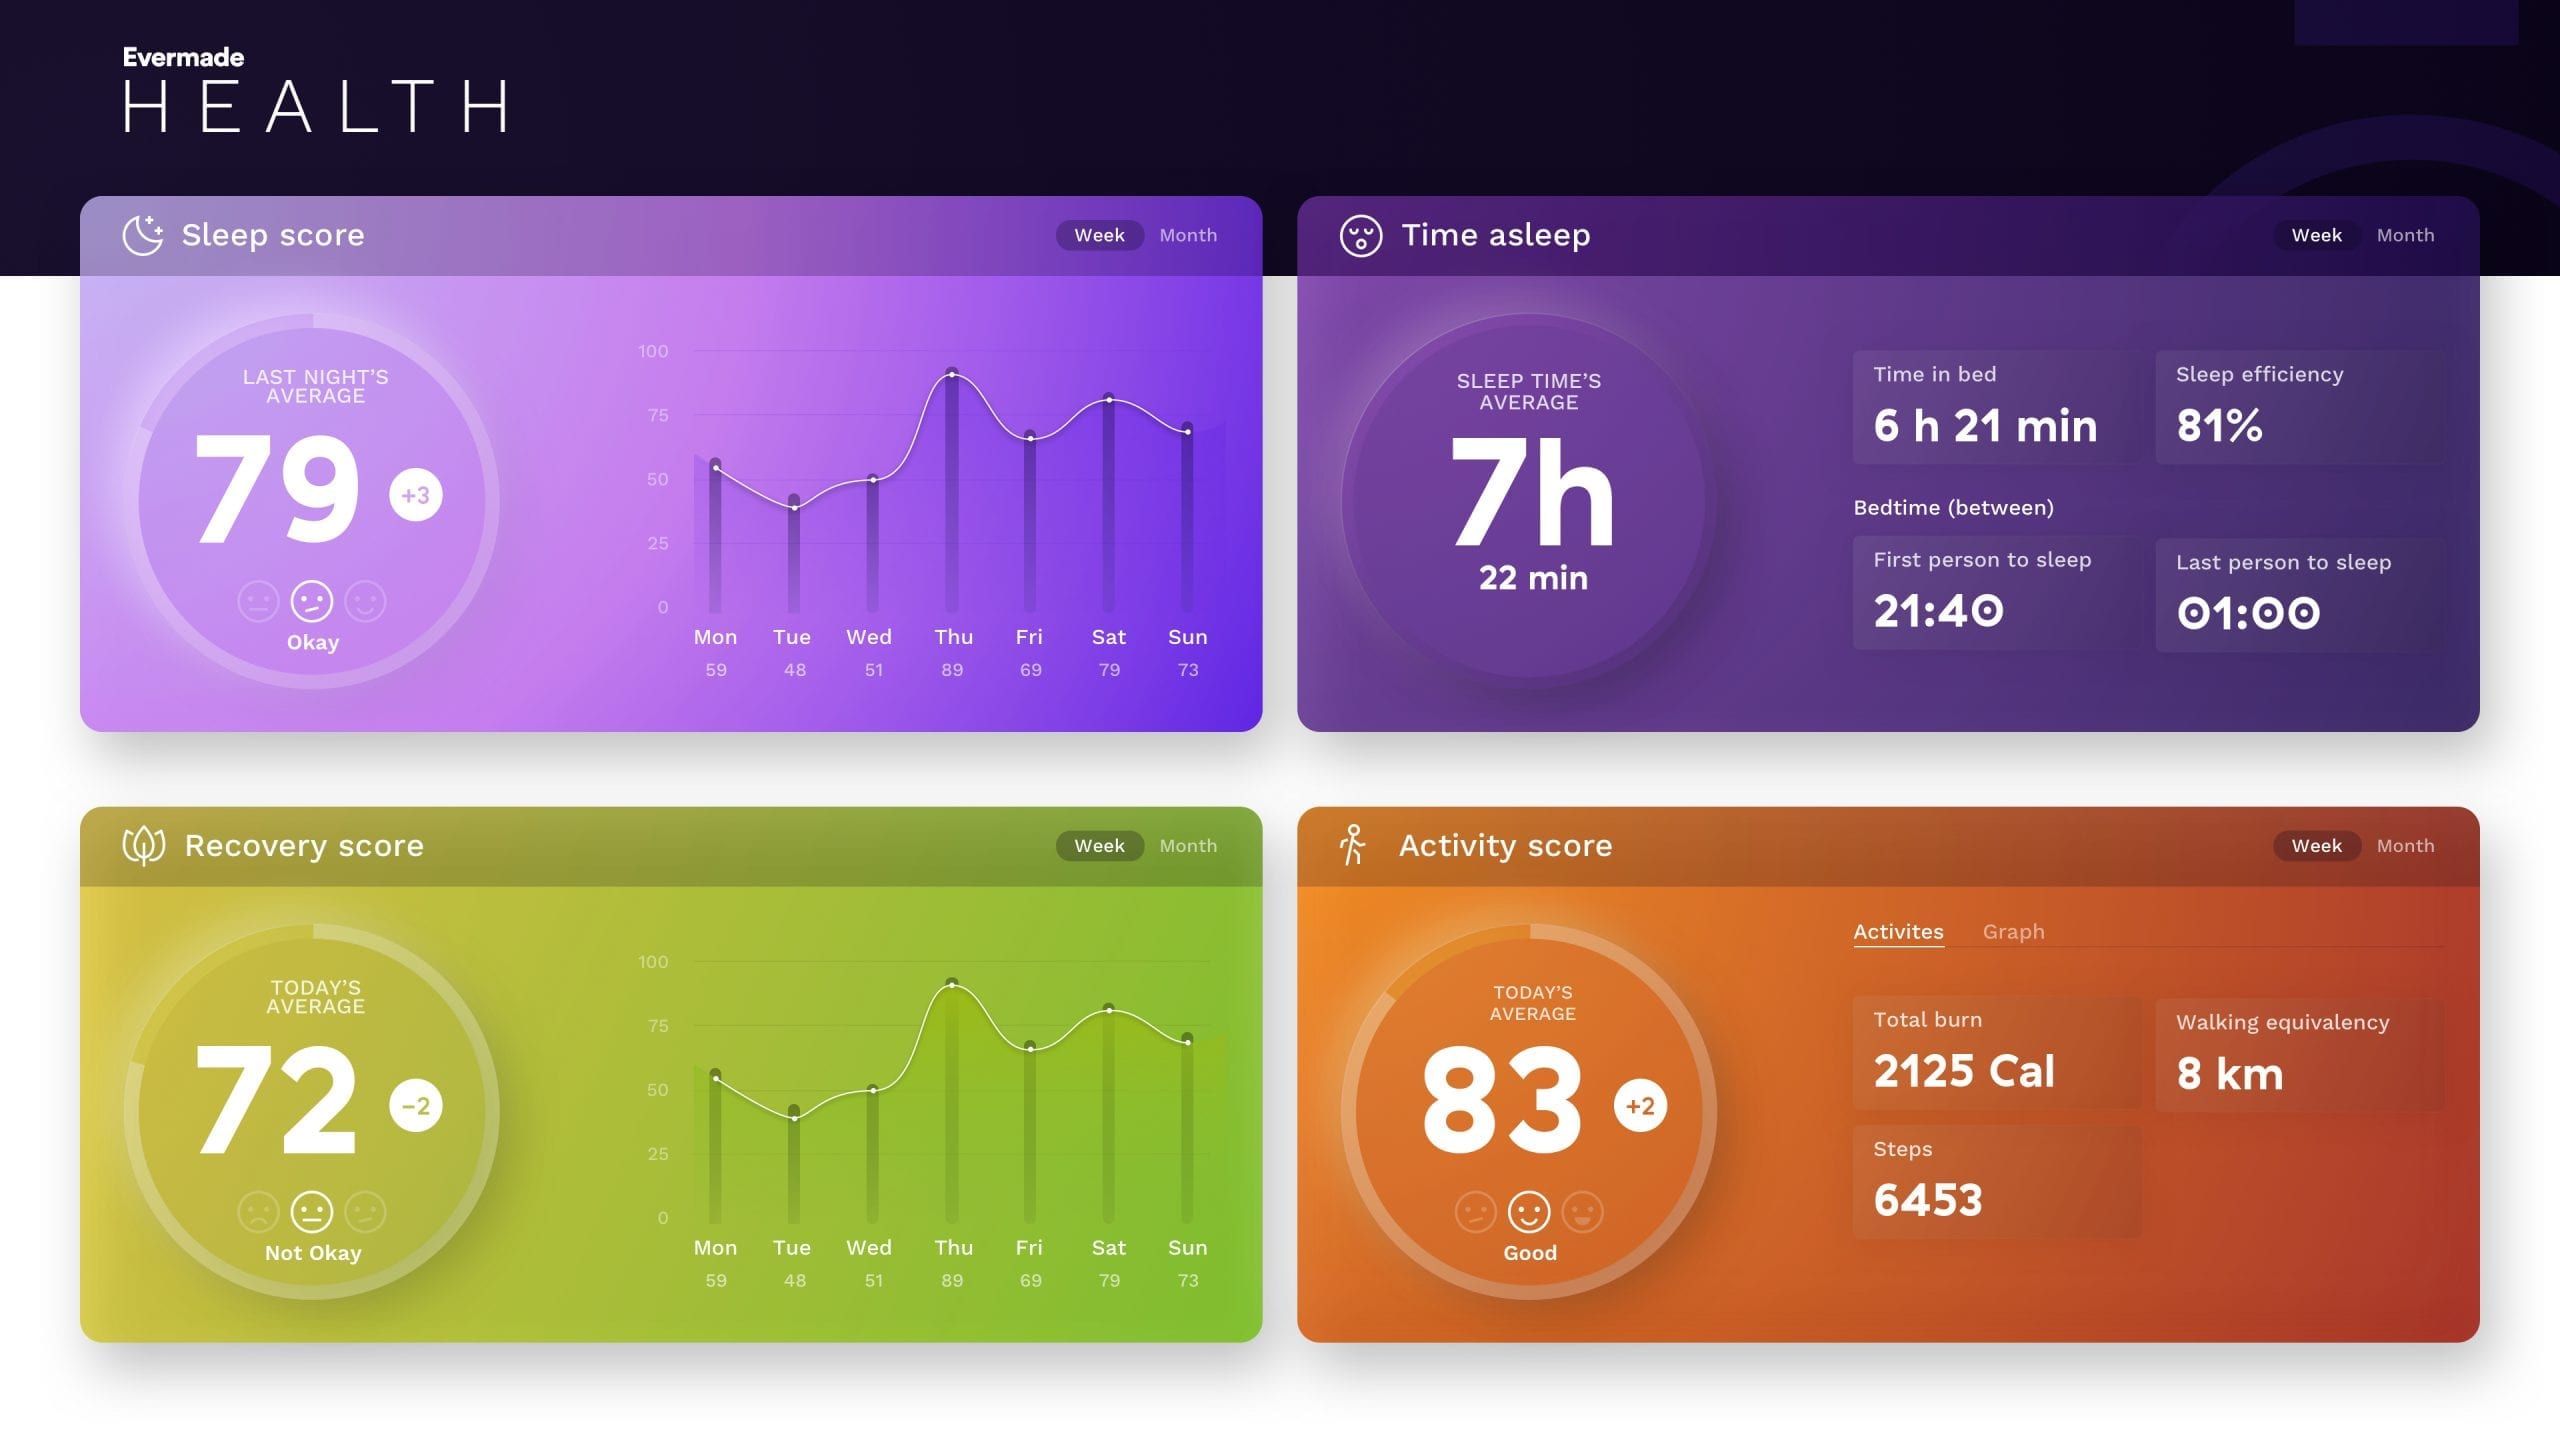 A draft of what the Team Wellness KPI Dashboard could look like